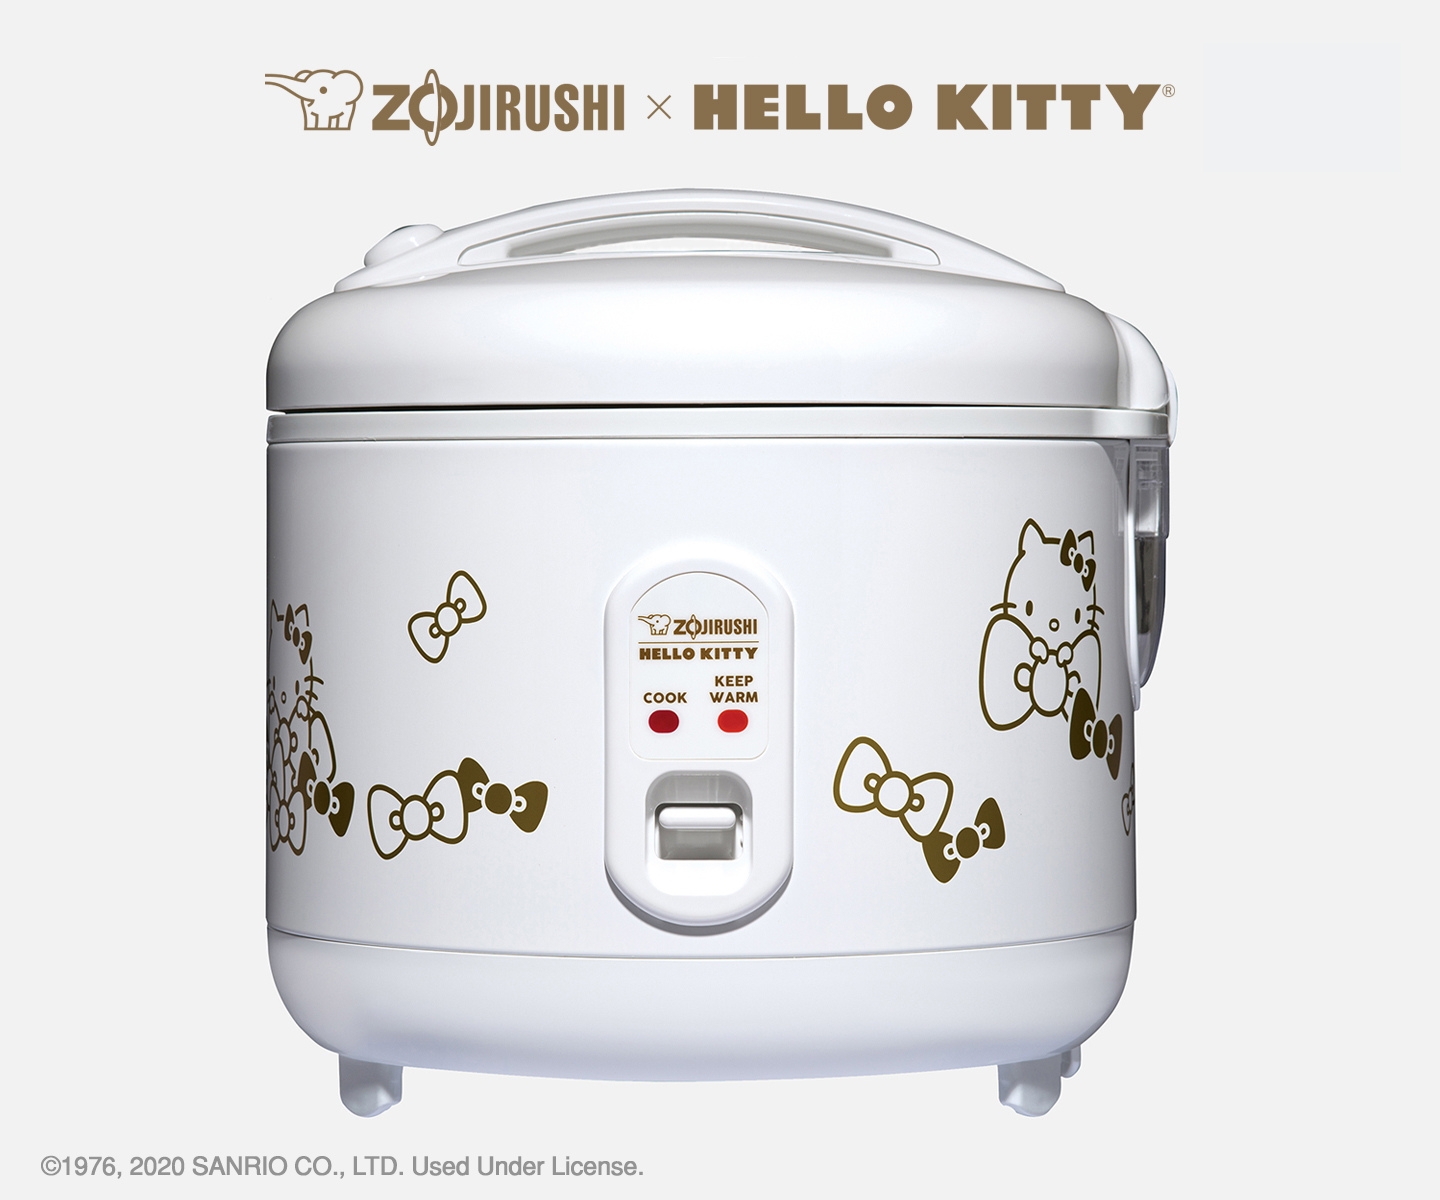 ZOJIRUSHI x HELLO KITTY<sup>®</sup> Automatic Rice Cooker & Warmer NS-RPC10KT